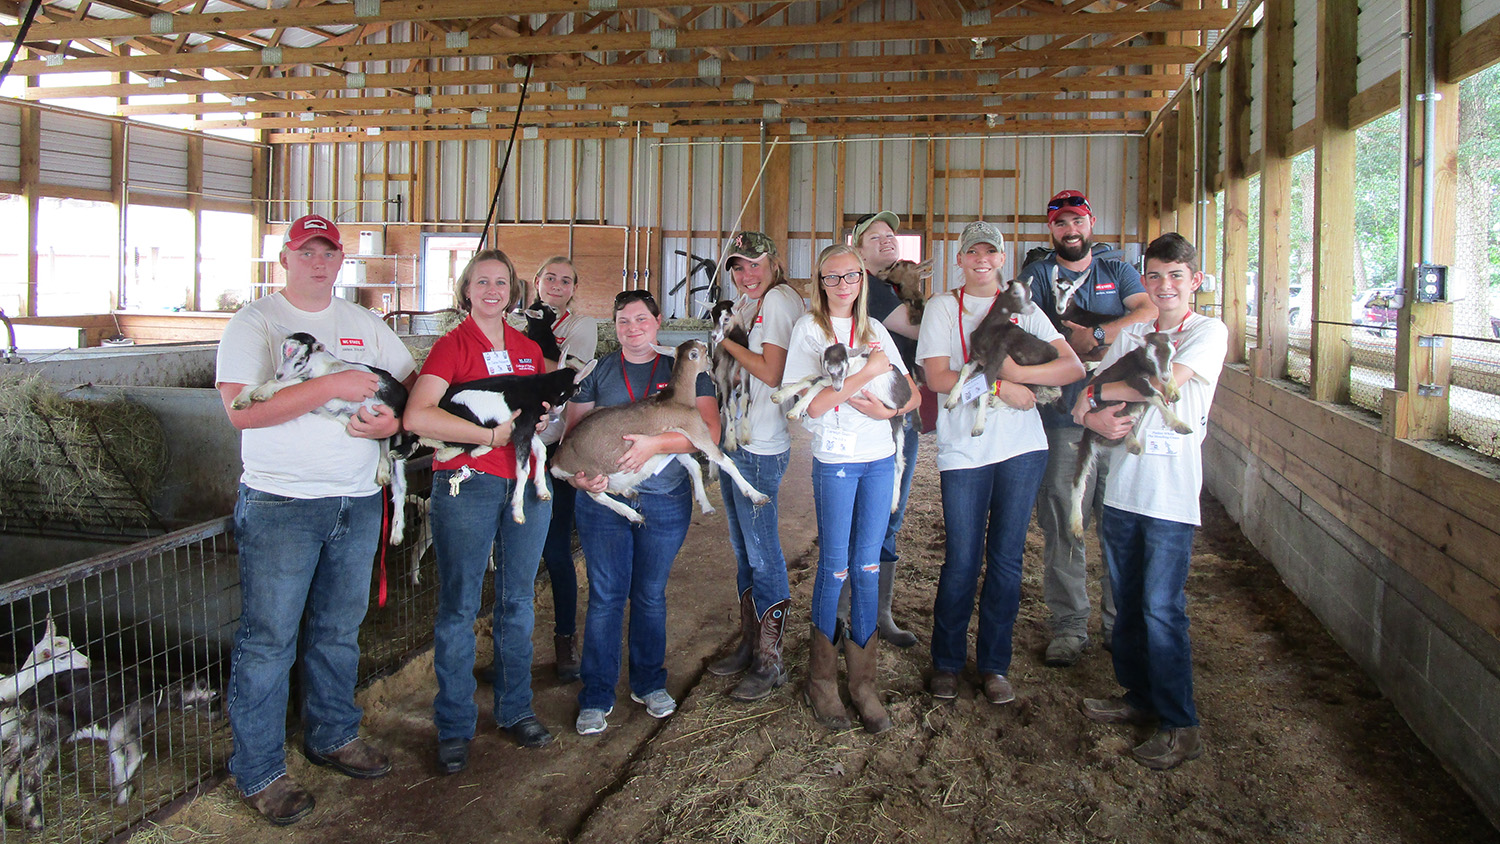 Participants of Livestock Science Camp holding animals.